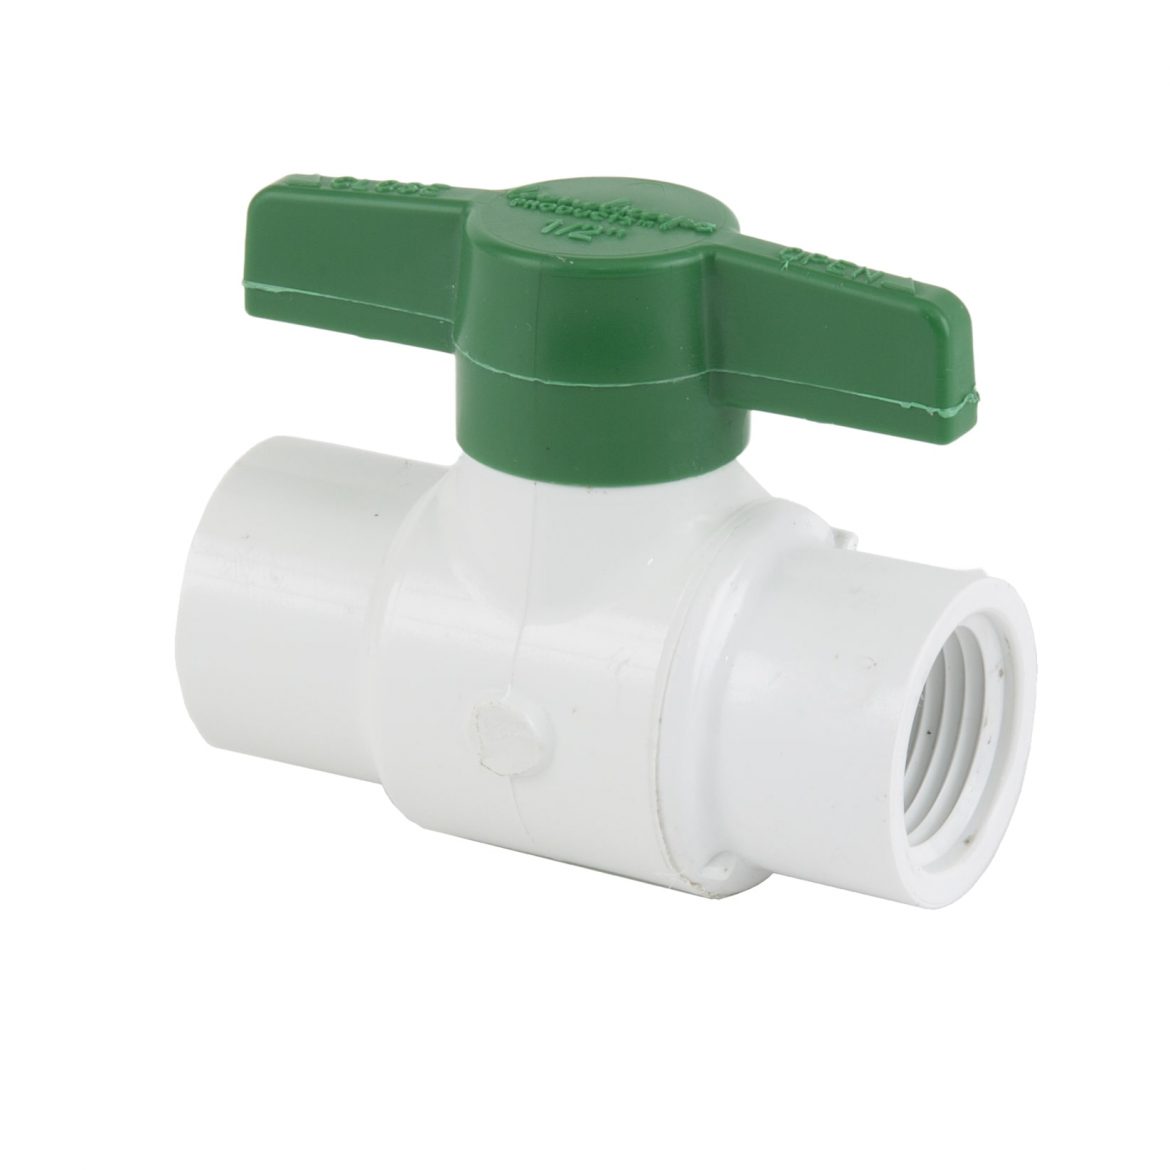 3/4-inch Threaded Plastic Ball Valve - Landscape Products Inc.